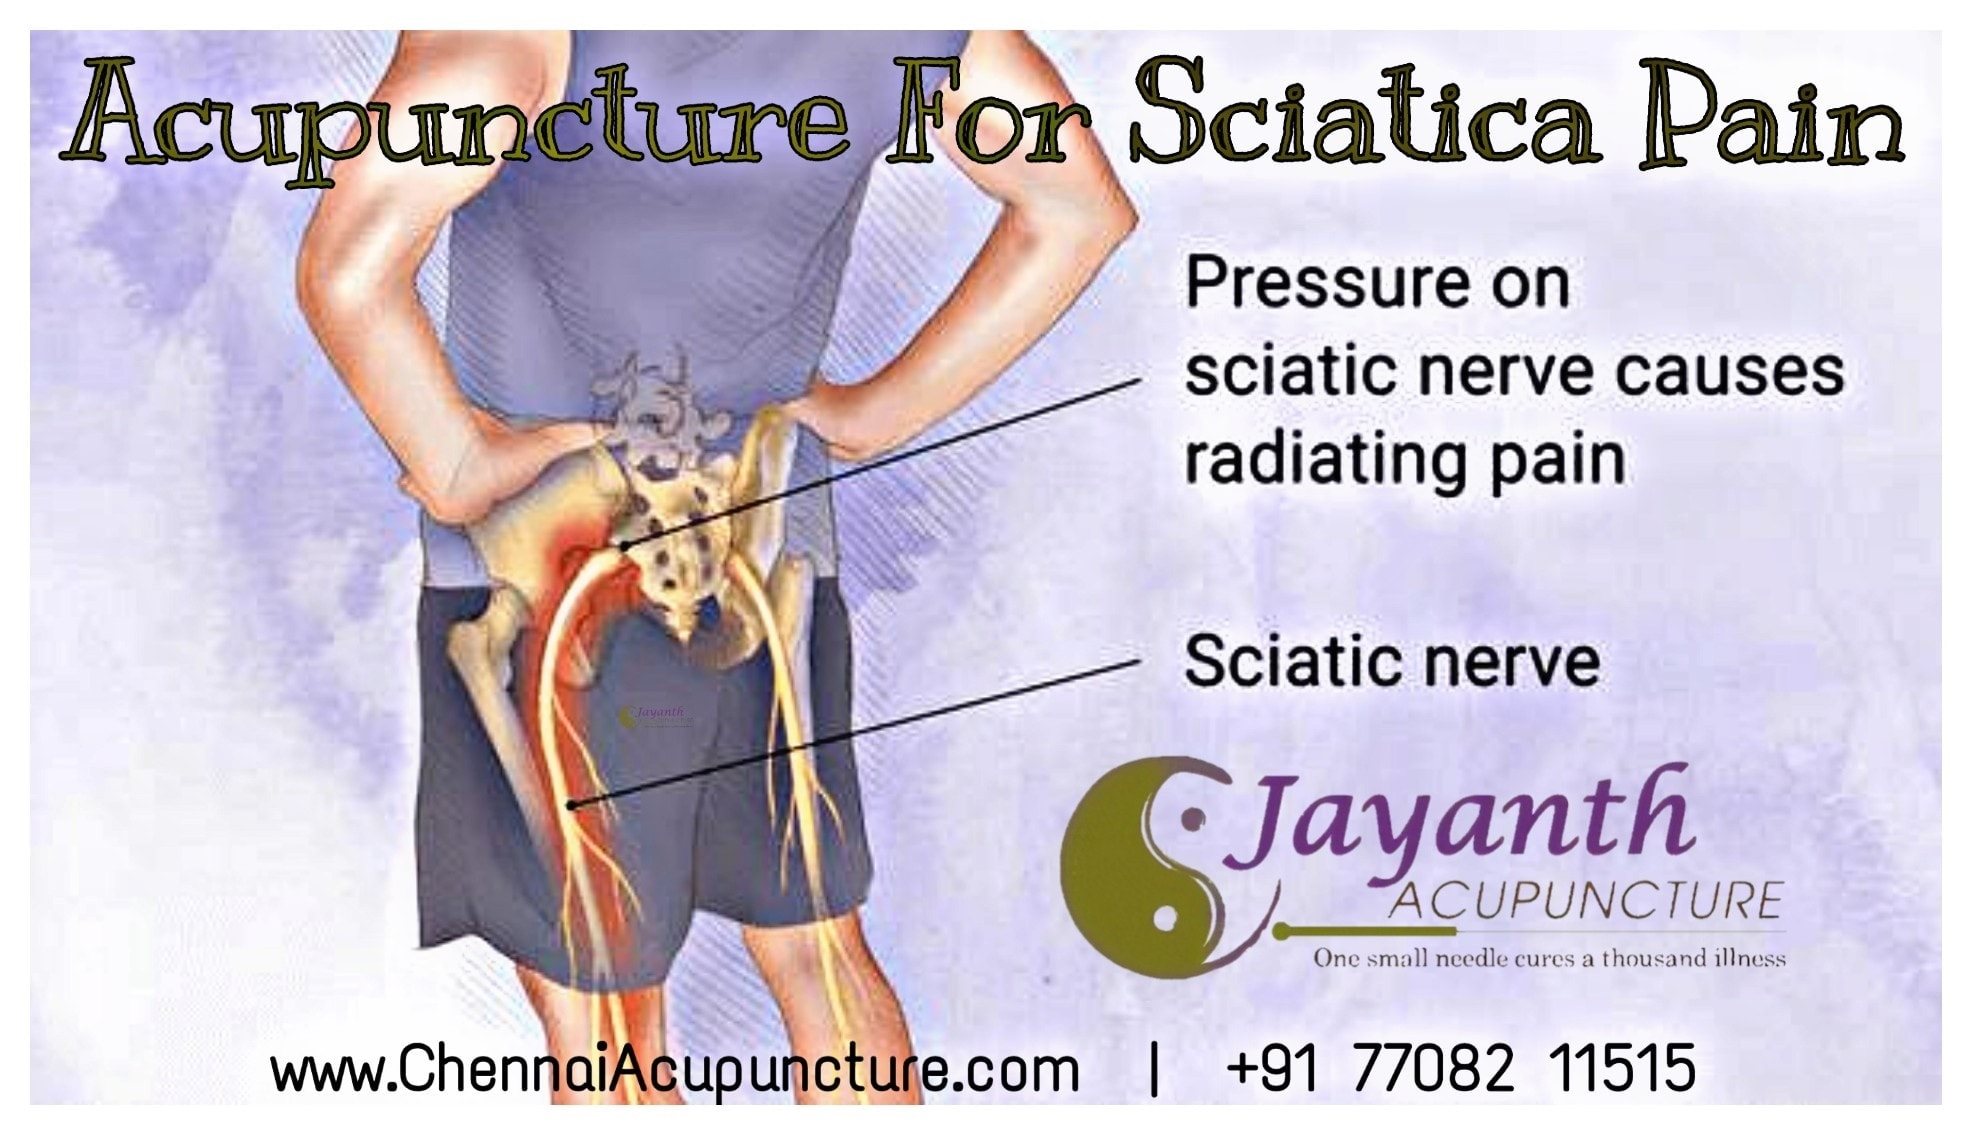 Image - Chennai Jayanth Acupuncture Clinic